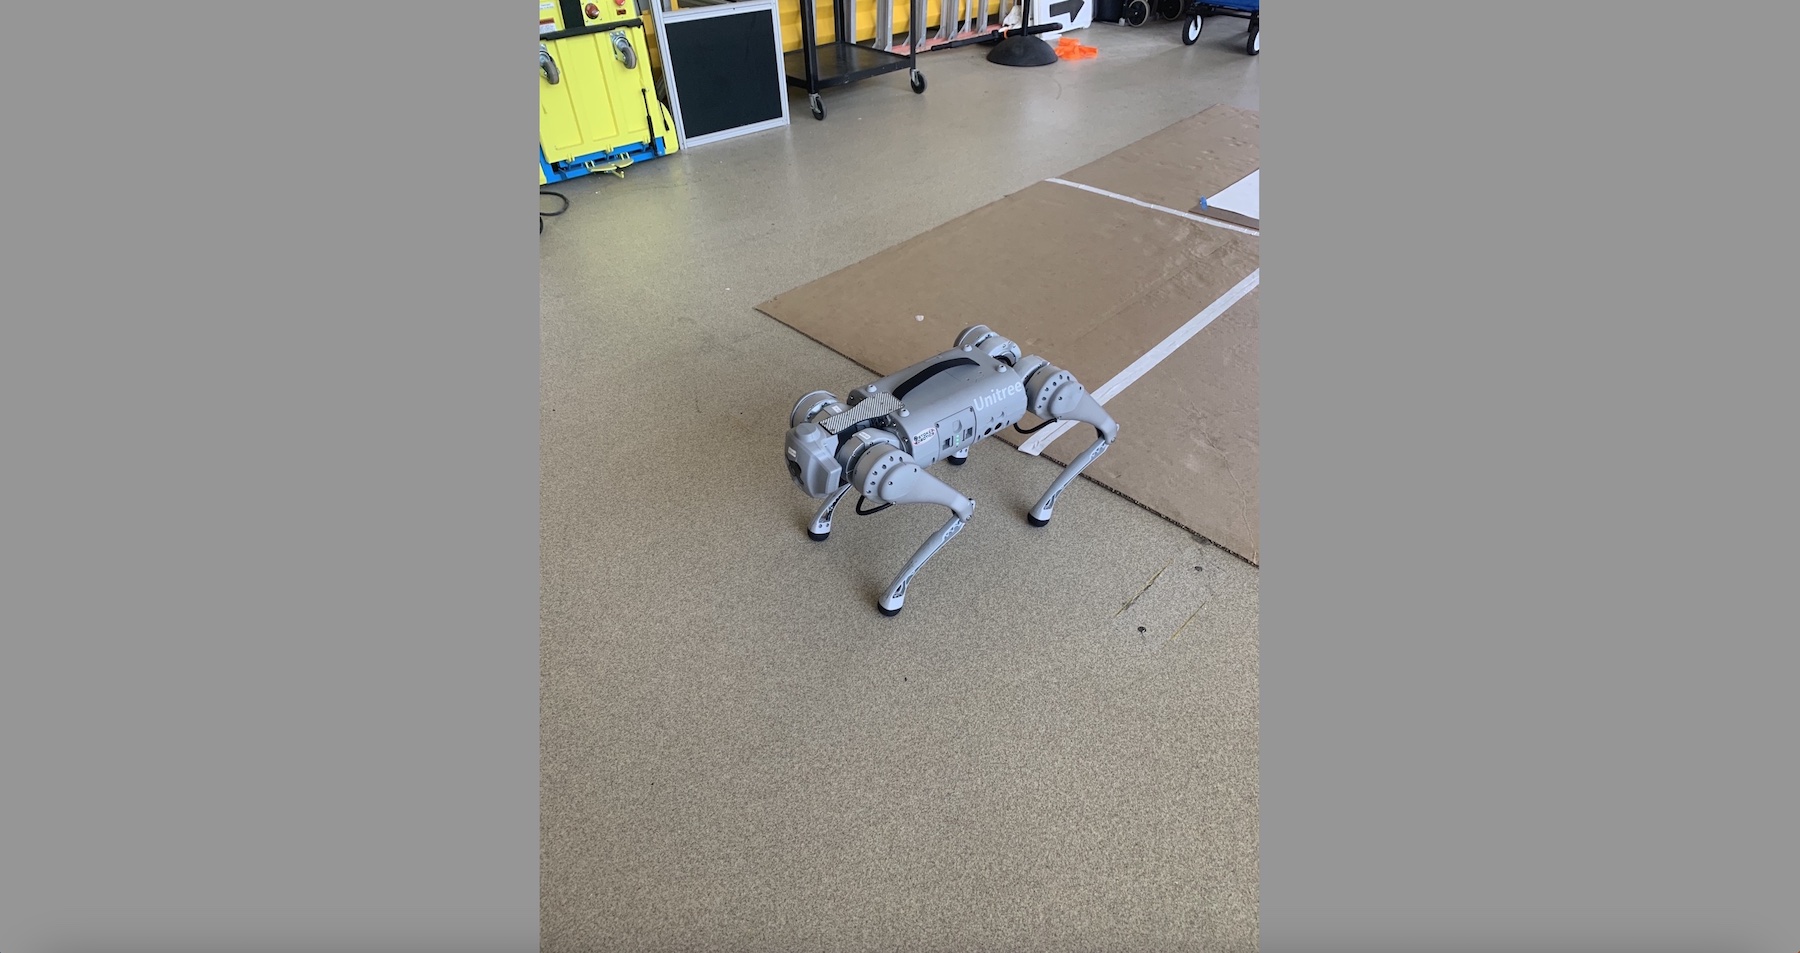 APSU's robot dog is capable of learning from and engaging with its surroundings based on advanced student programming, promoting hands-on learning experiences.